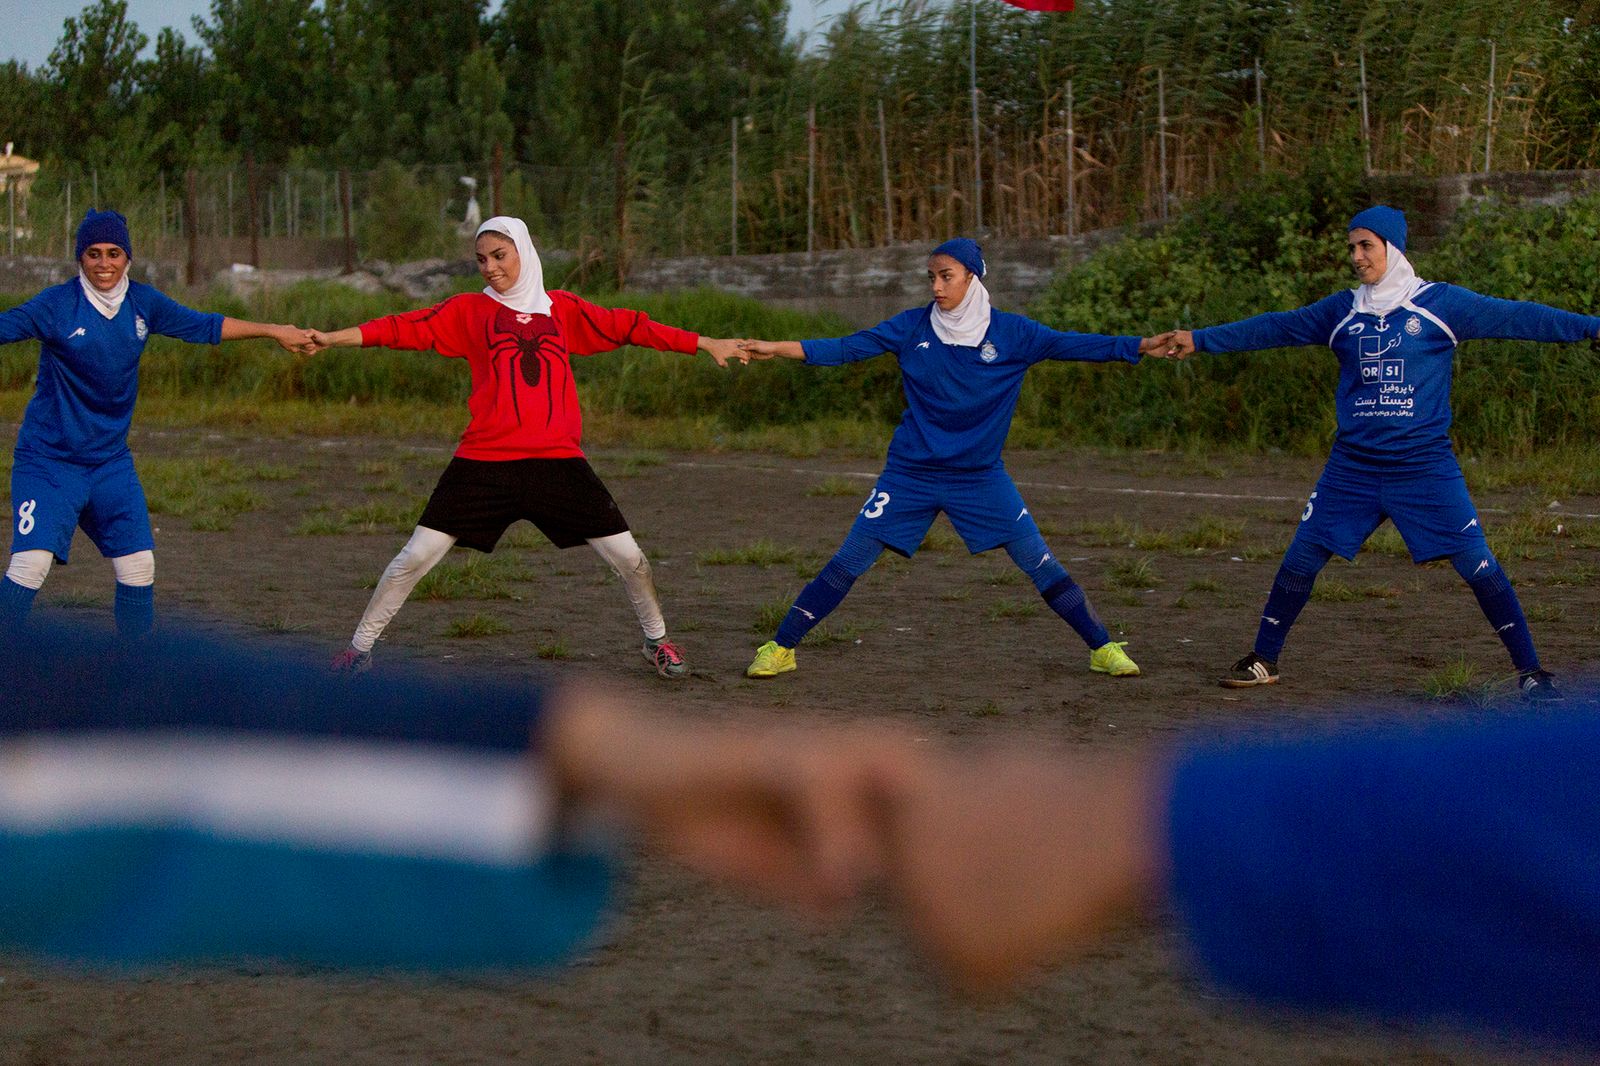 © Azadeh Besharati - The players were warming up to start their football game...